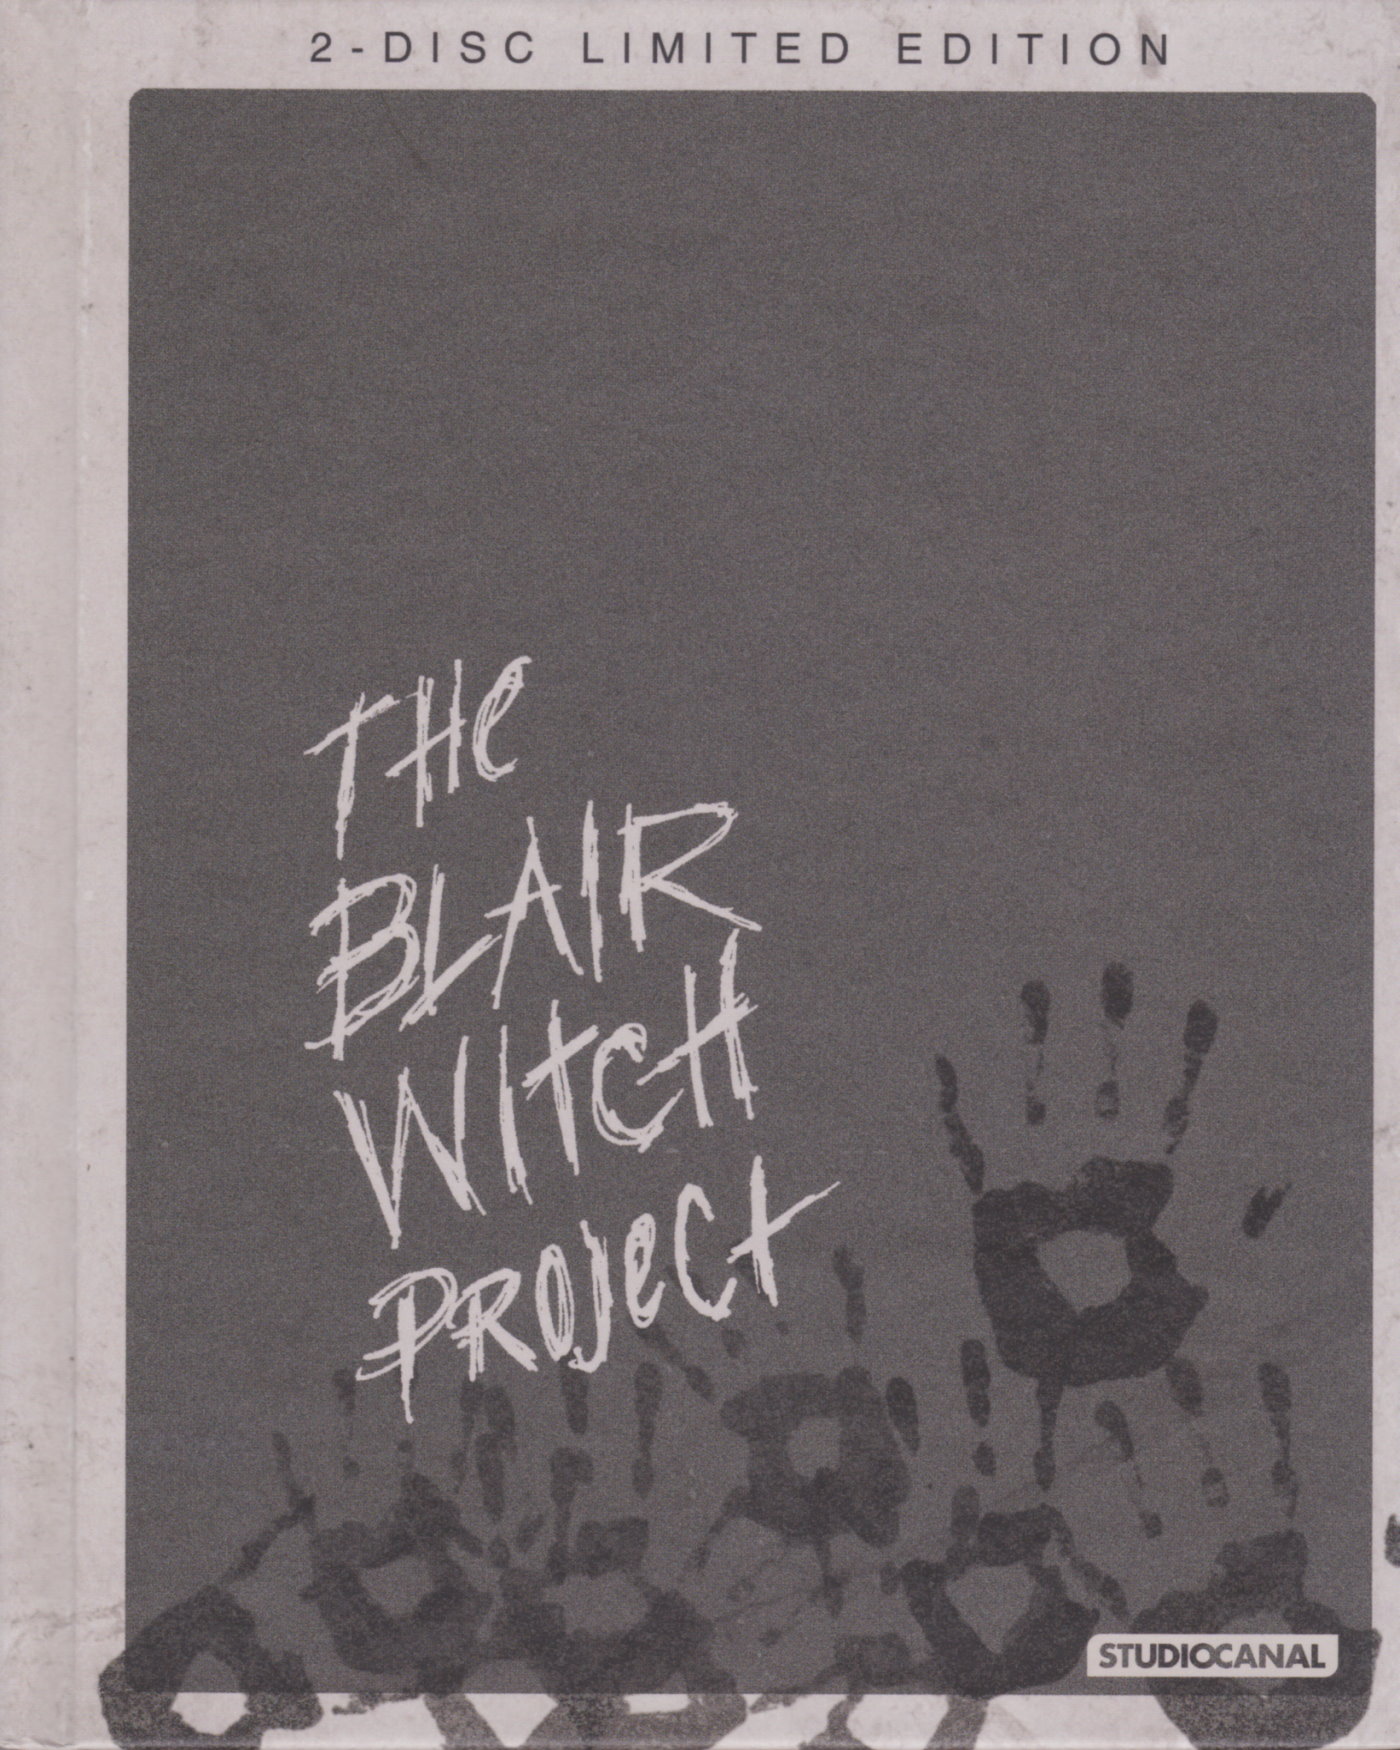 Cover - The Blair Witch Project.jpg